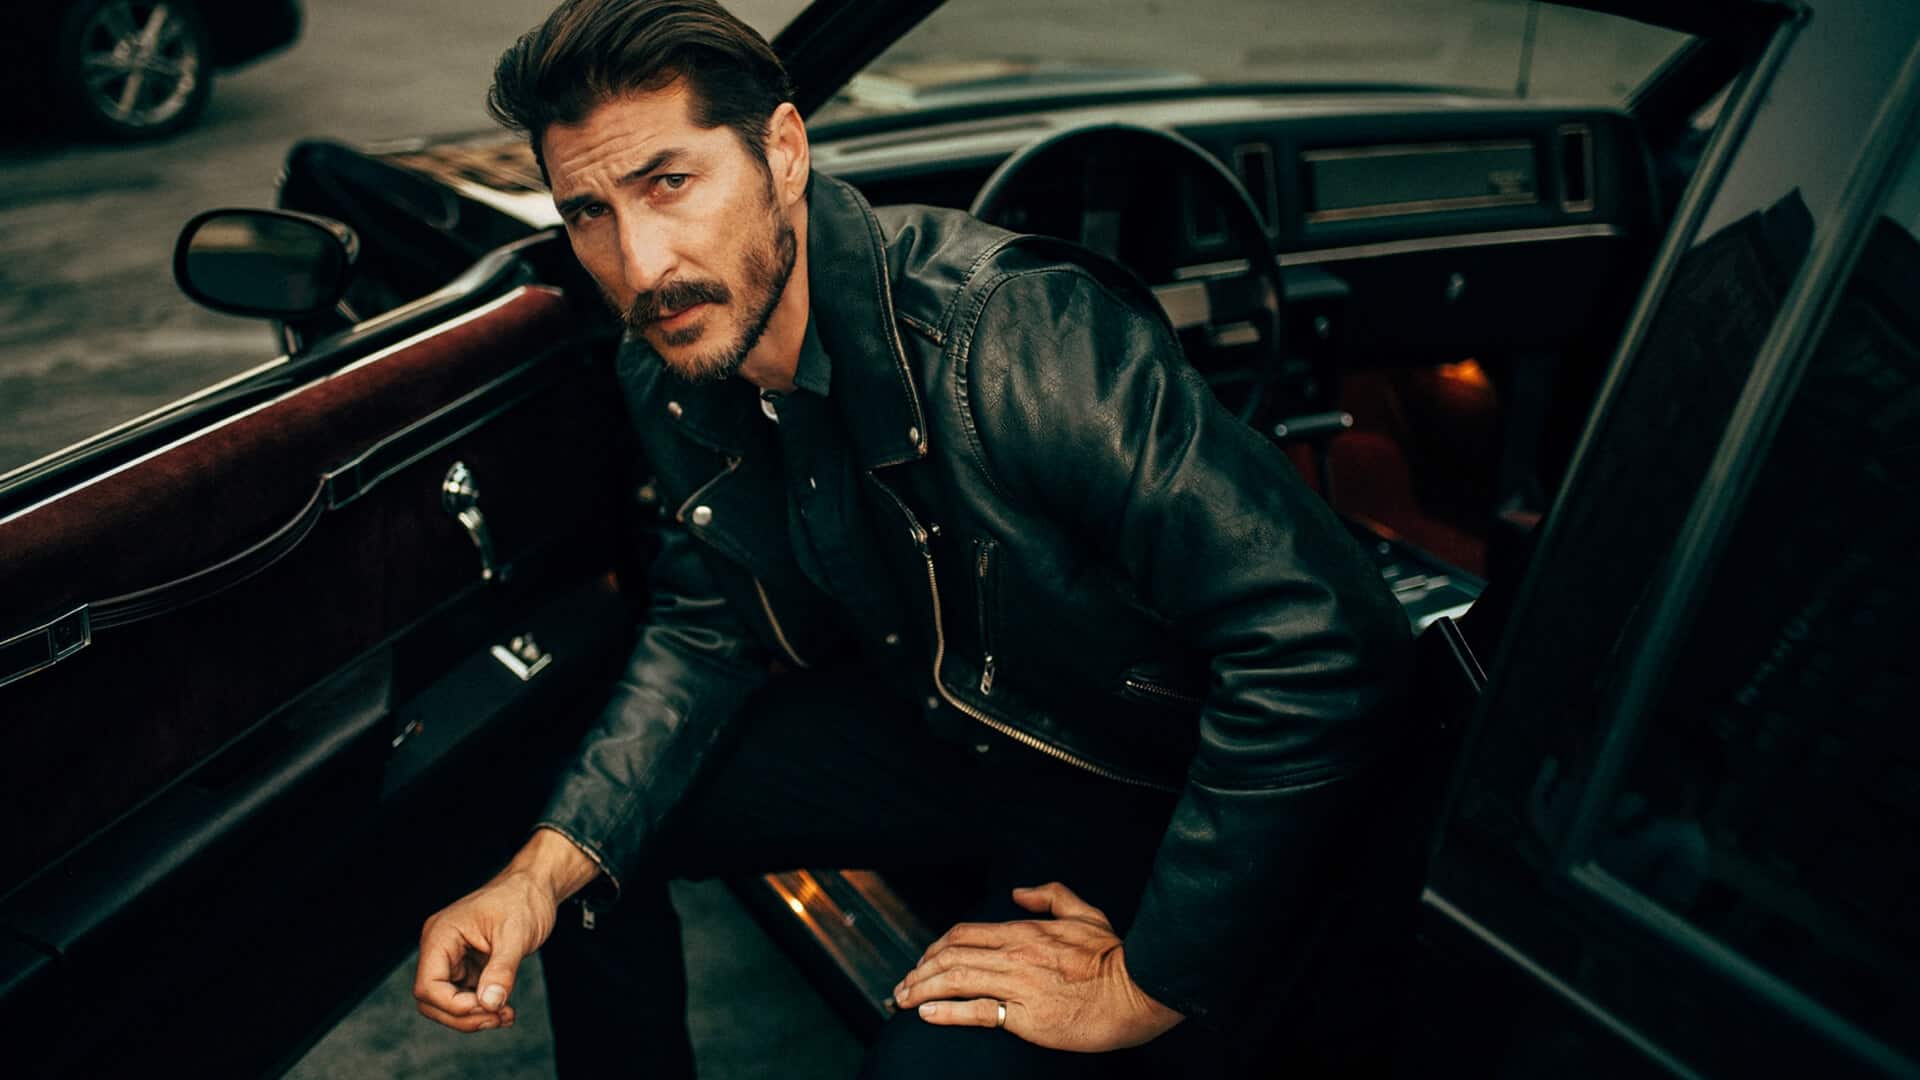 5 Reasons The Next Leather Jacket You Buy Should Be Brown Not Black | GQ